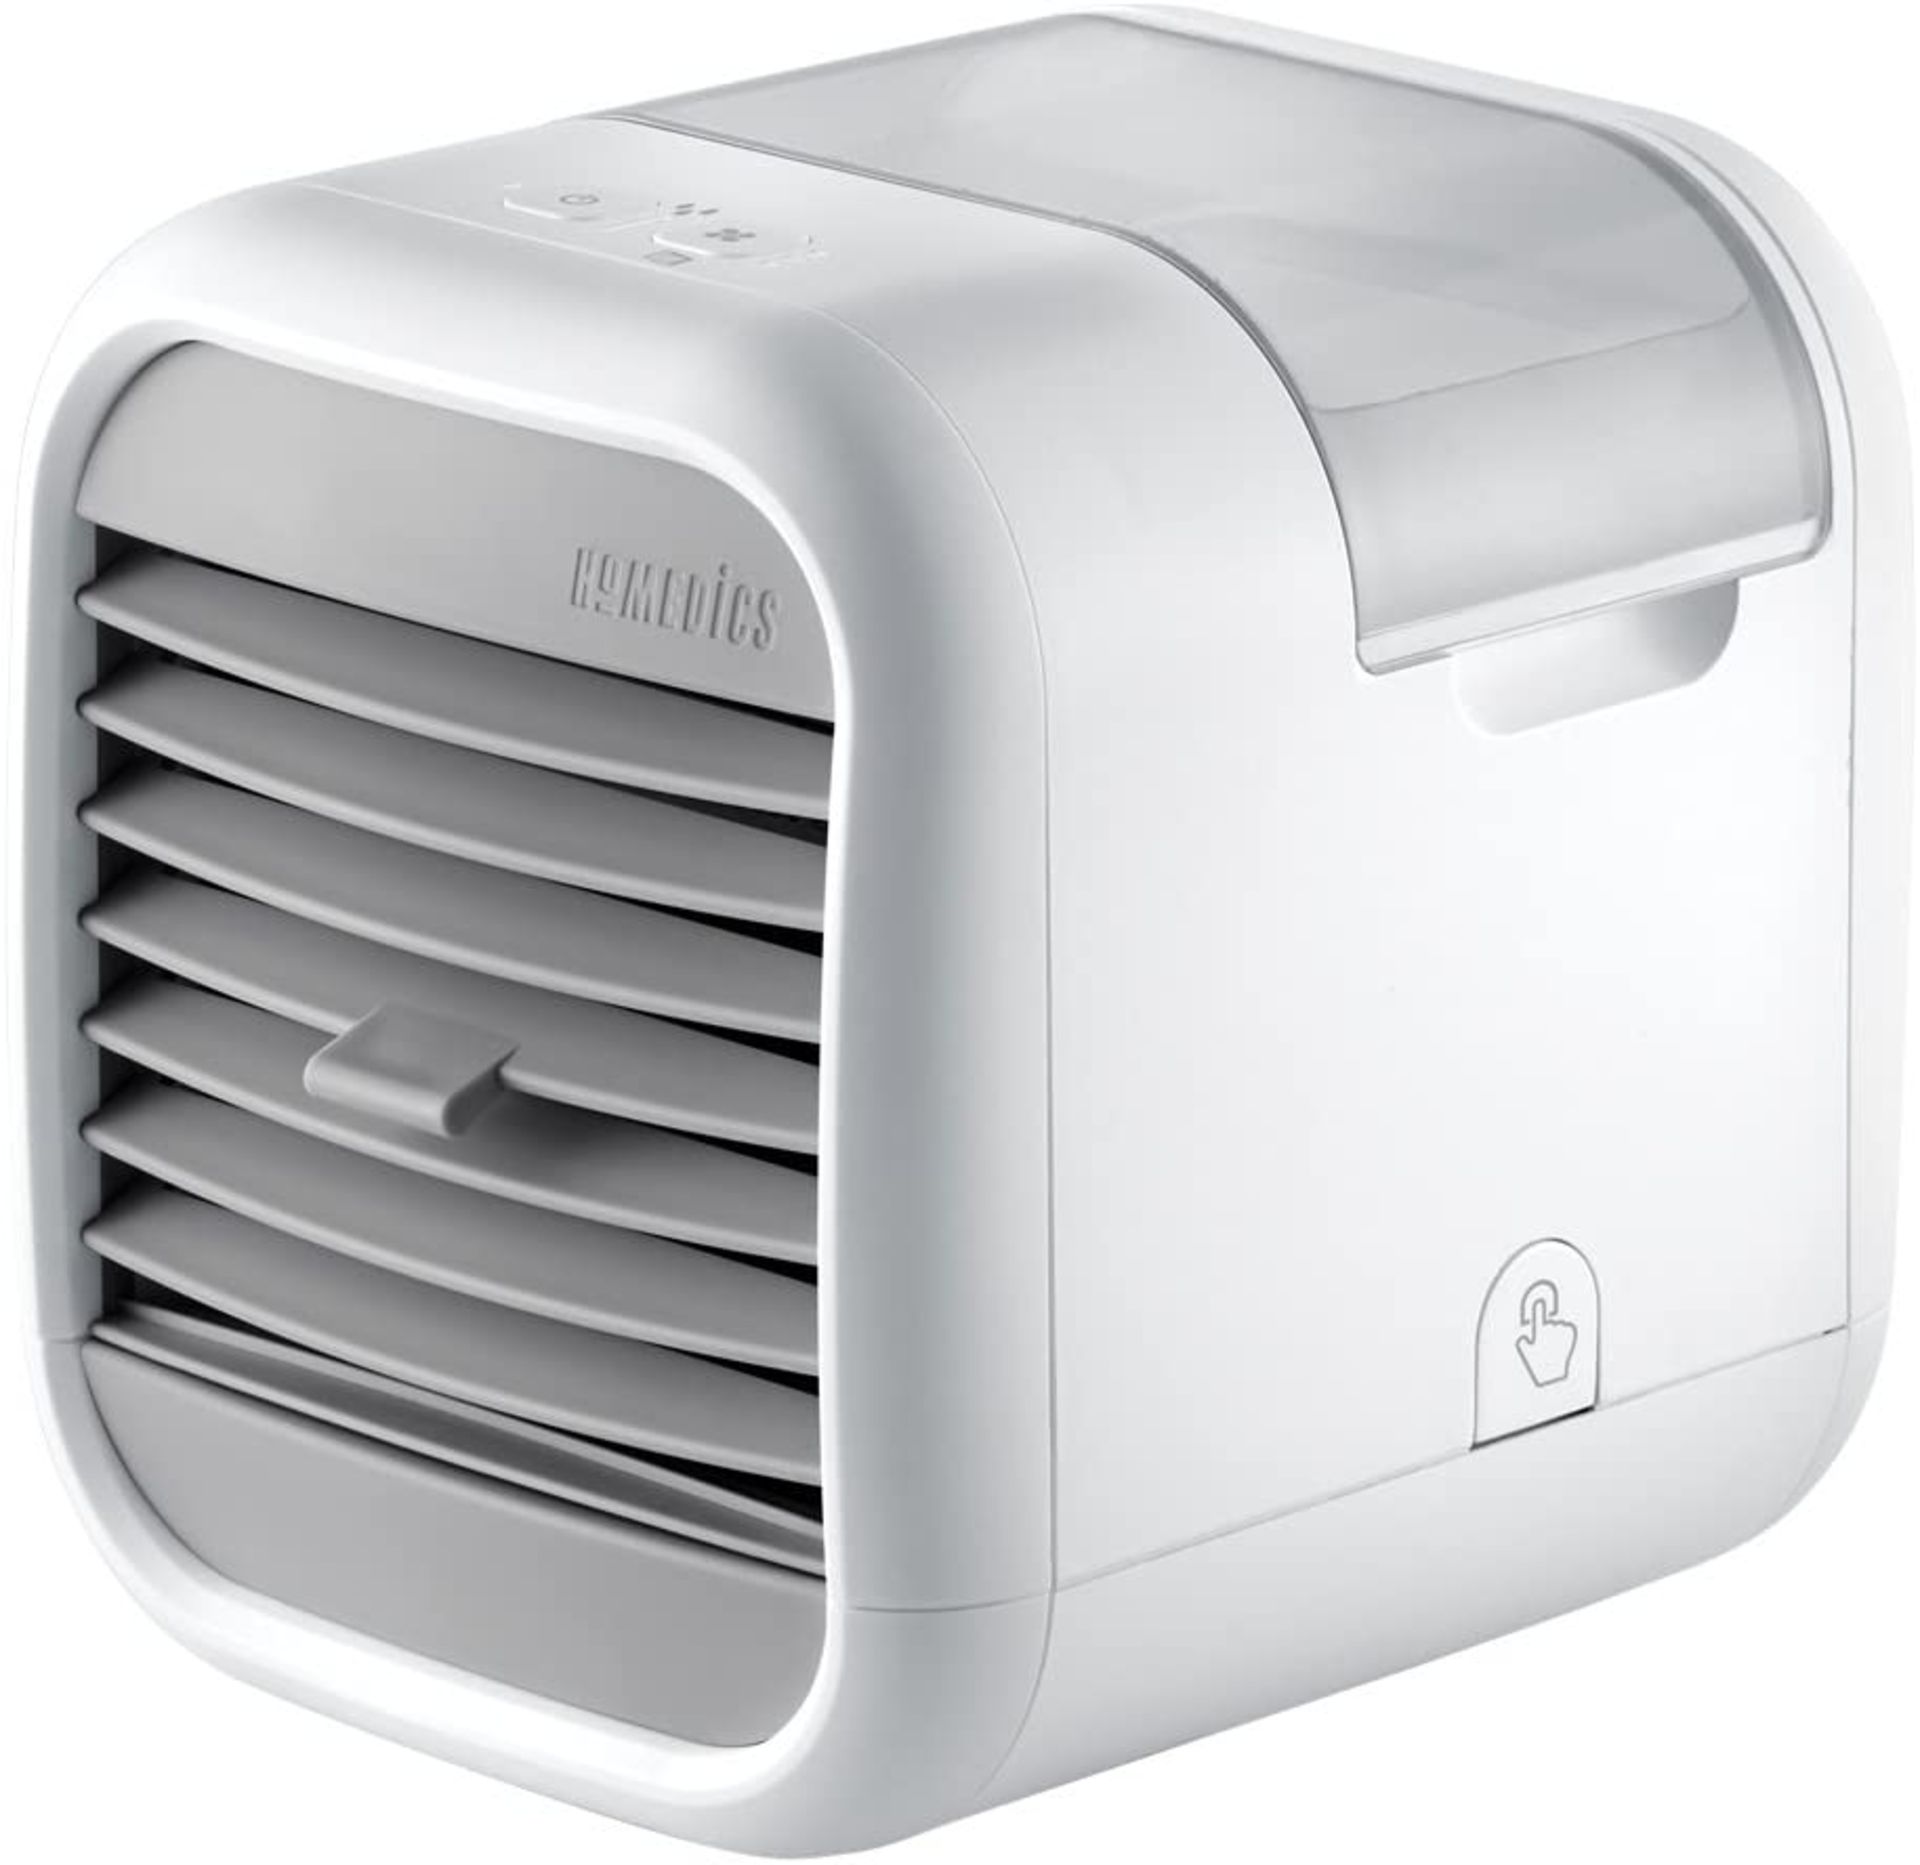 + VAT Grade A Homedics My Chill Plus Personal Space Cooler - 1.8m (6ft) Cooling Zone - Cools Your